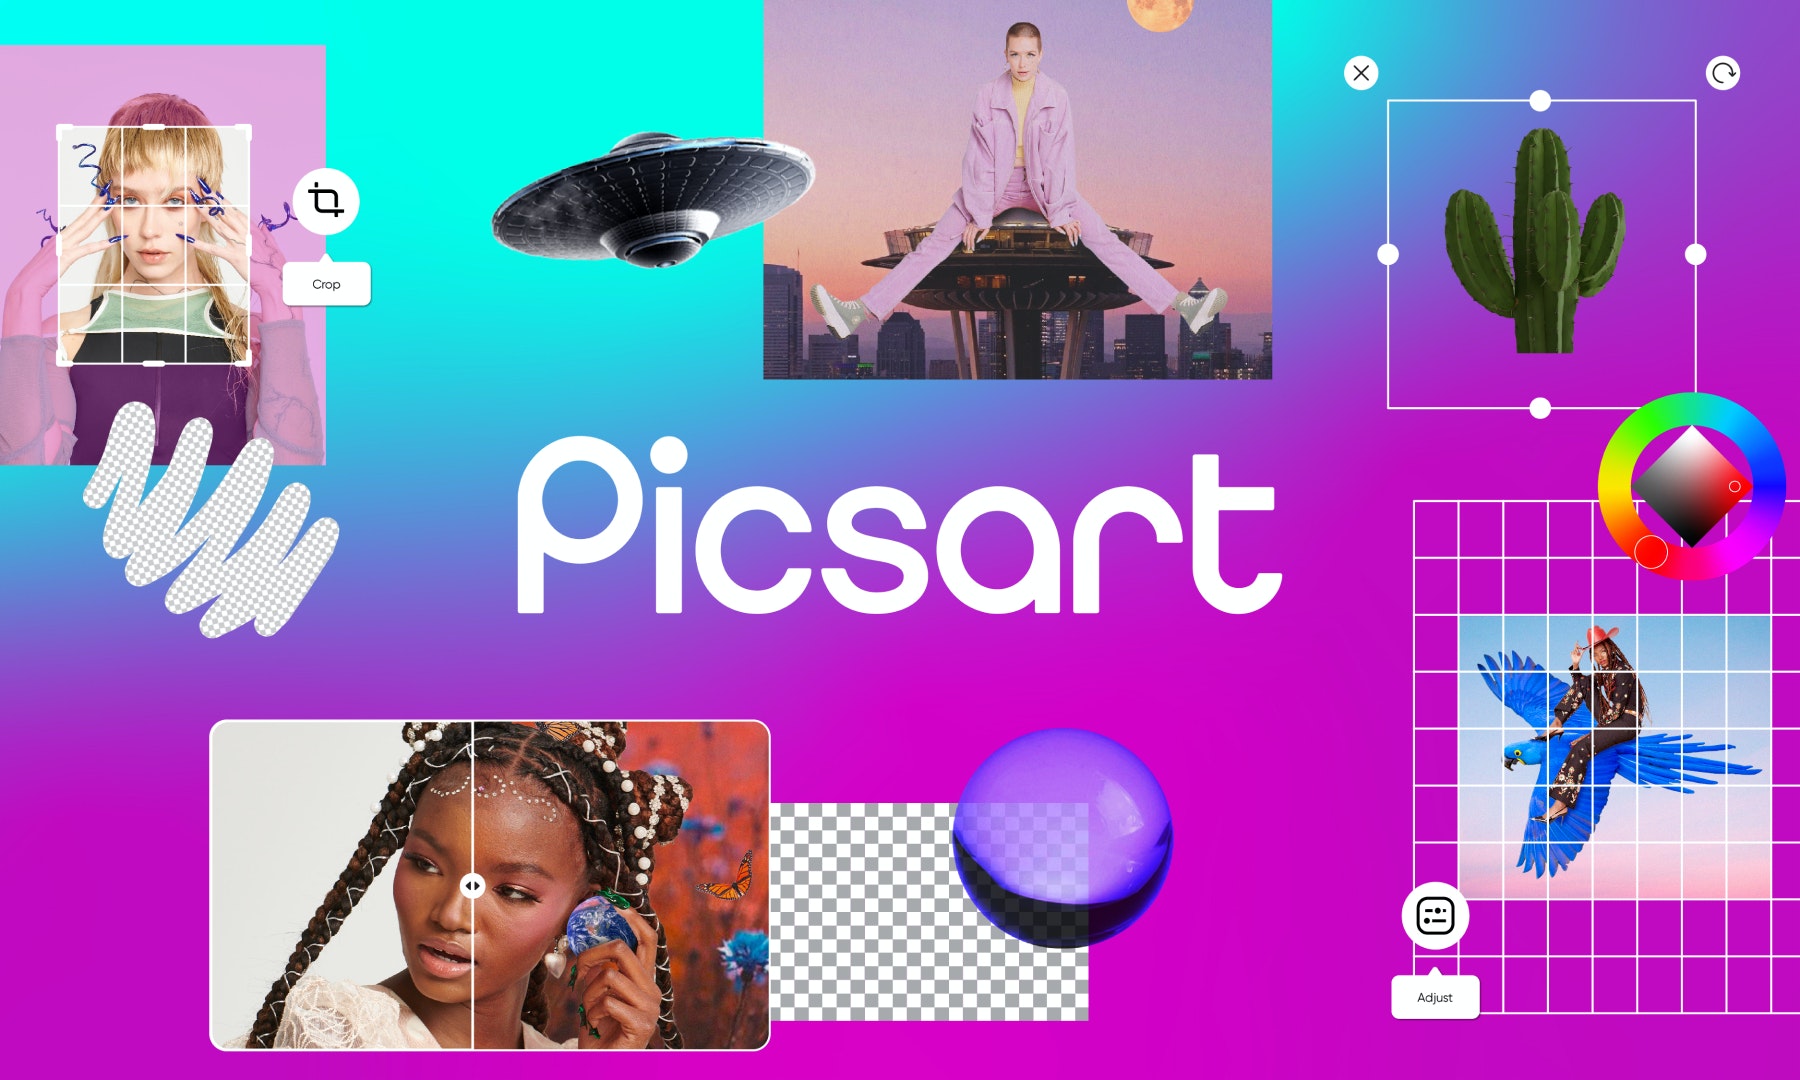 Picsart - AI tools for creators to design, edit, draw and share photo and video content